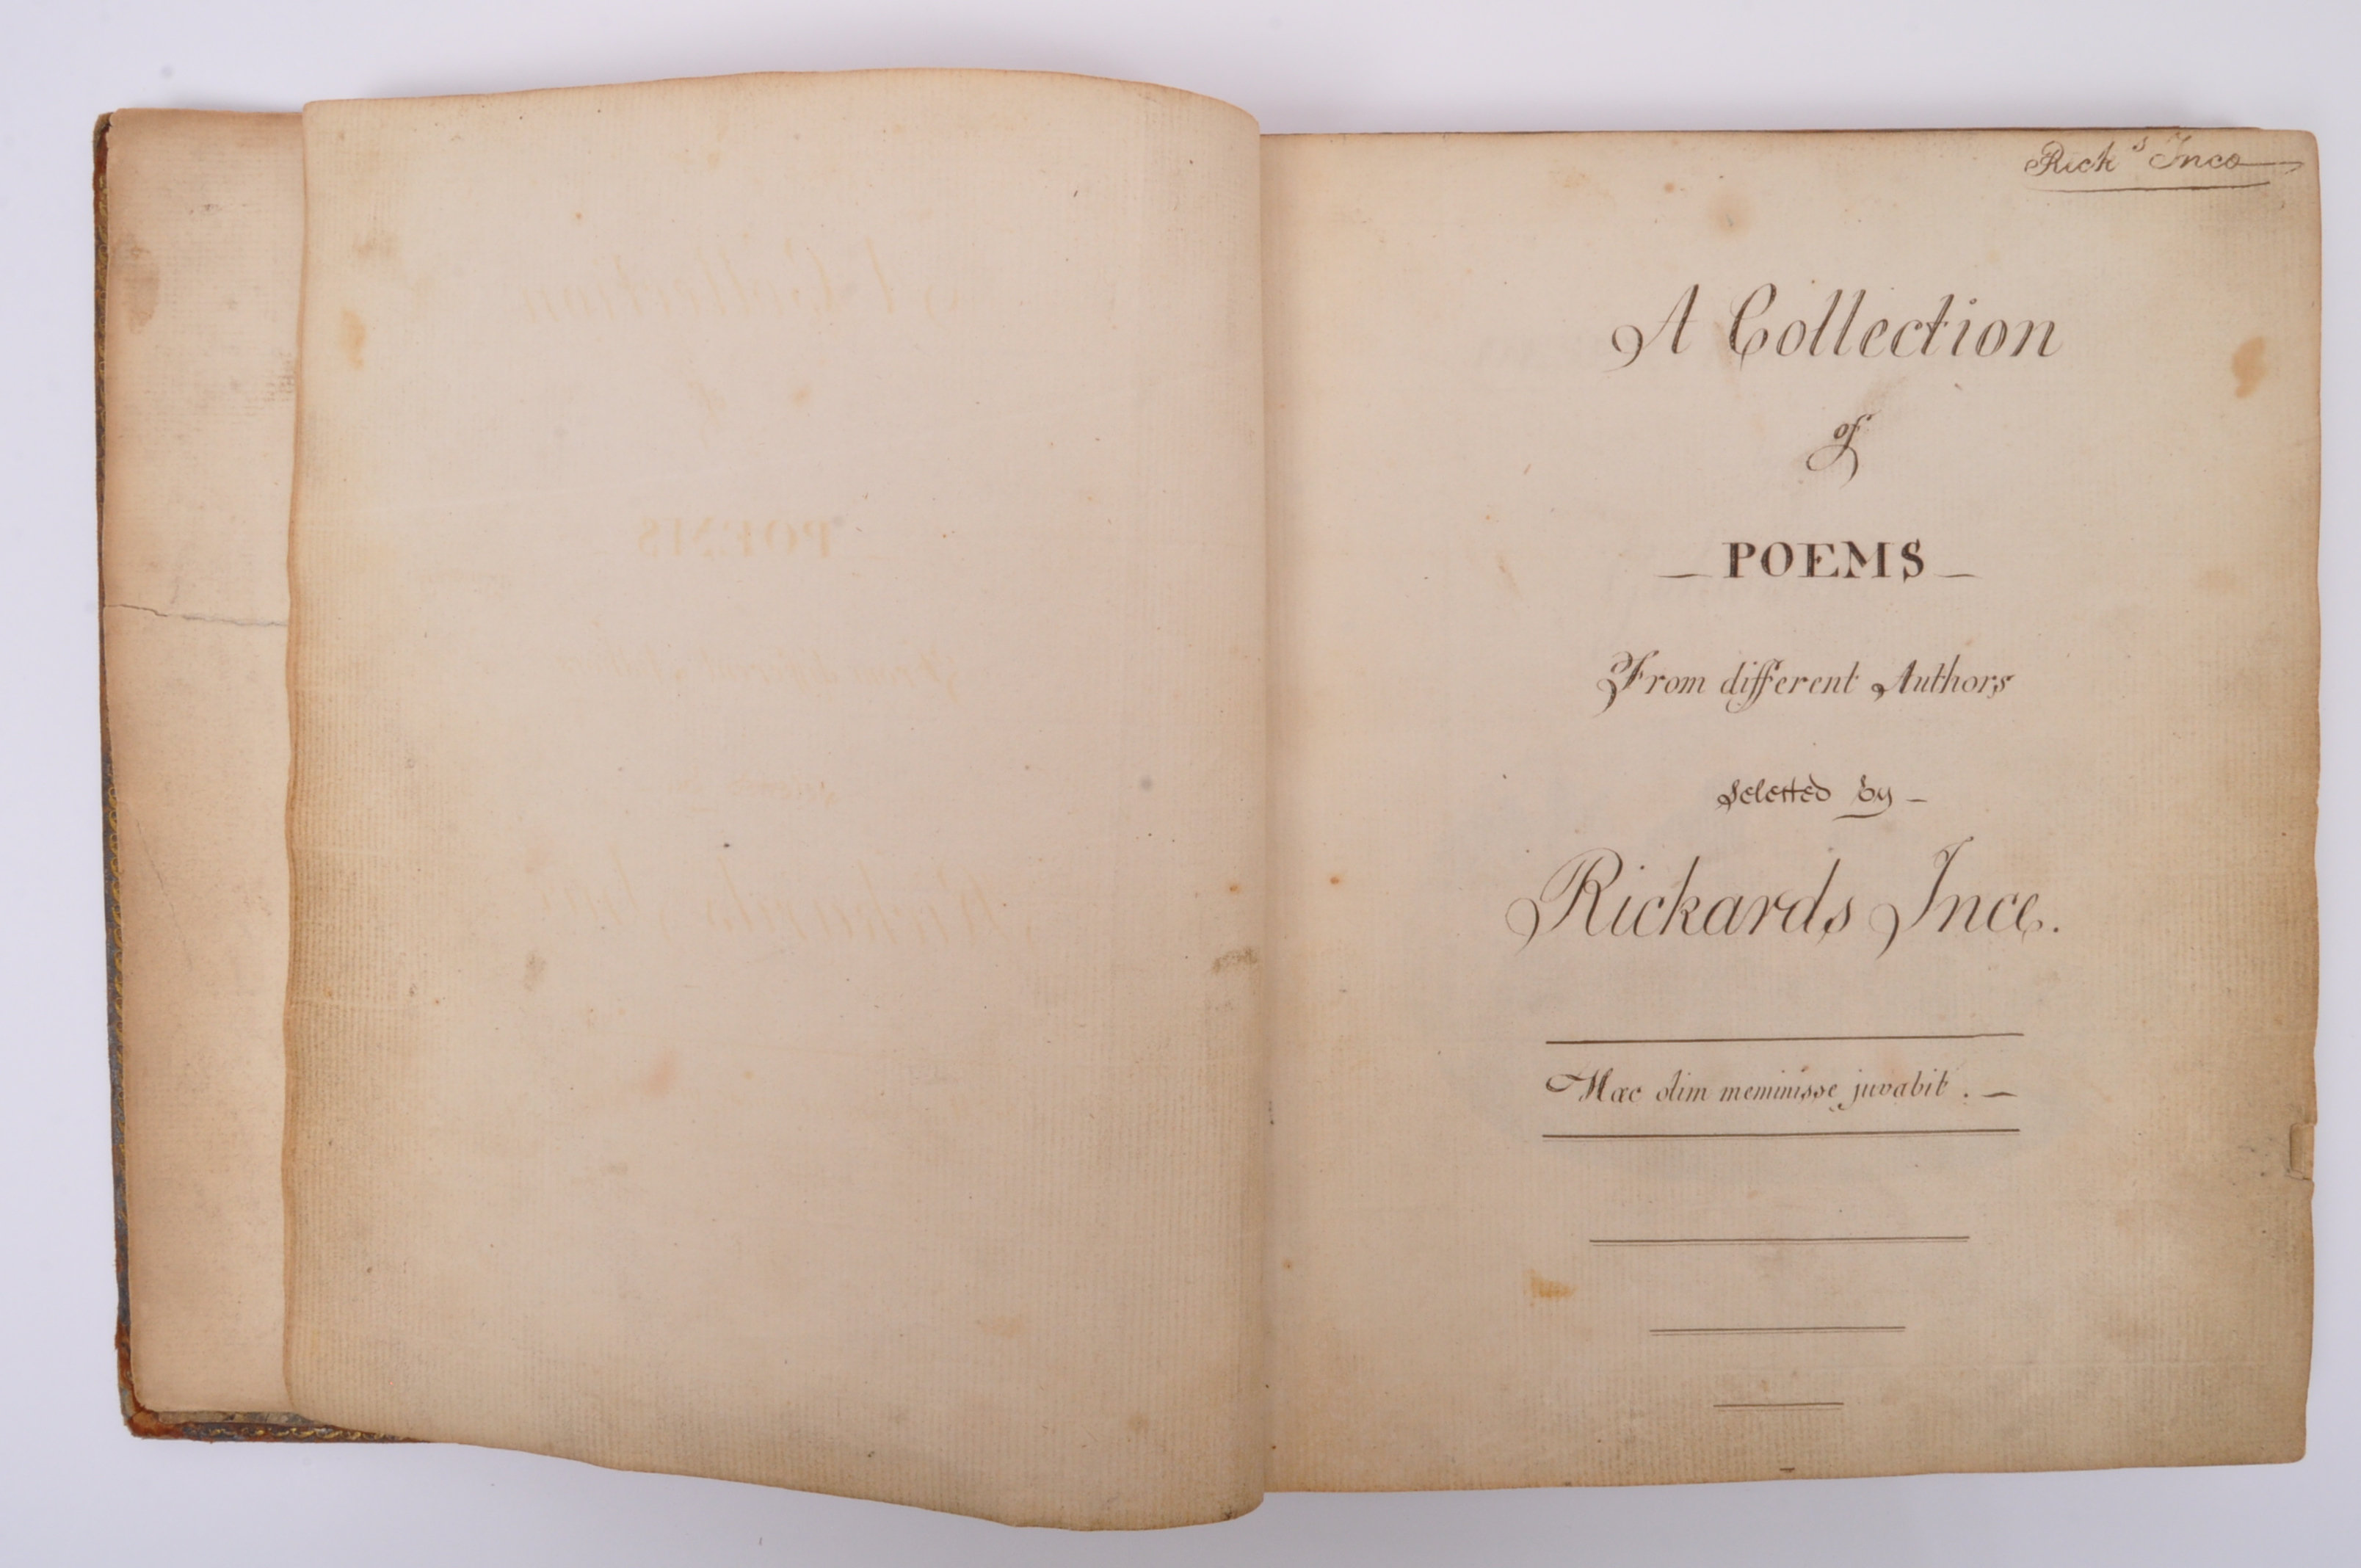 1794 - A COLLECTION OF POEMS - HANDWRITTEN MANUSCRIPT BOOK - Image 2 of 13